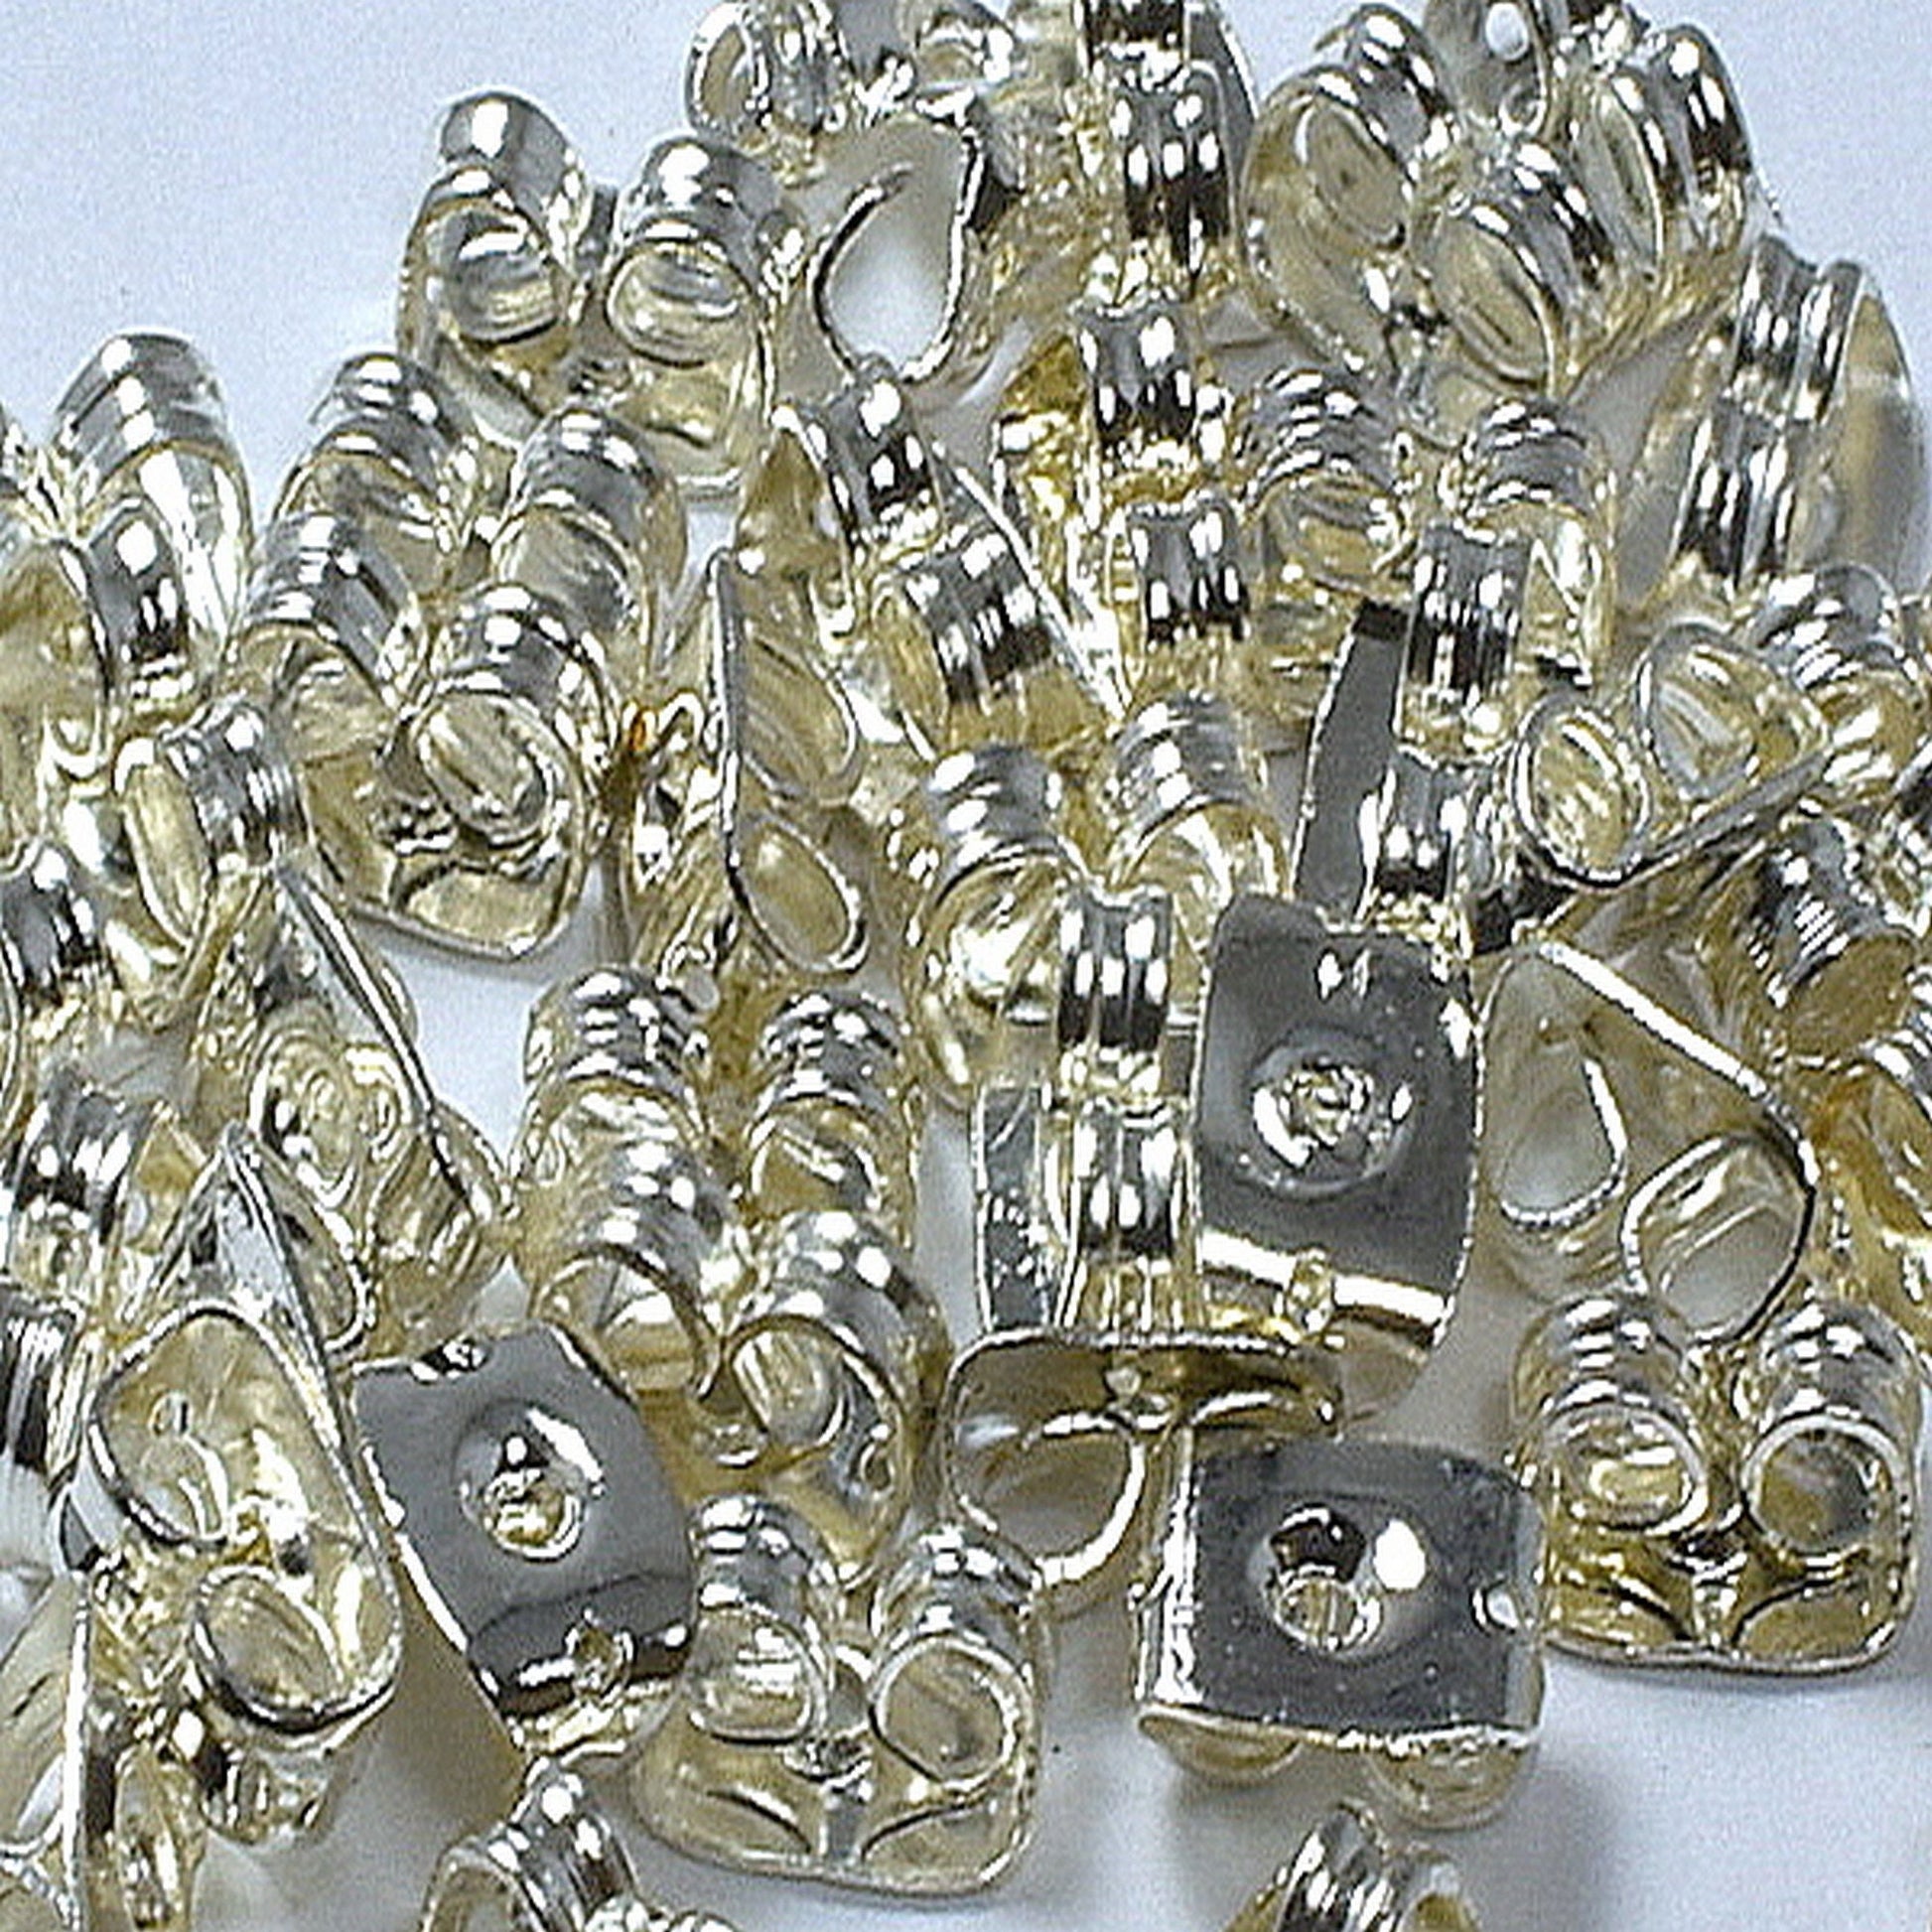 Ear-nut Gold Tone and Silver Tone Earring Backing 6mm Replacement back Earring Lock